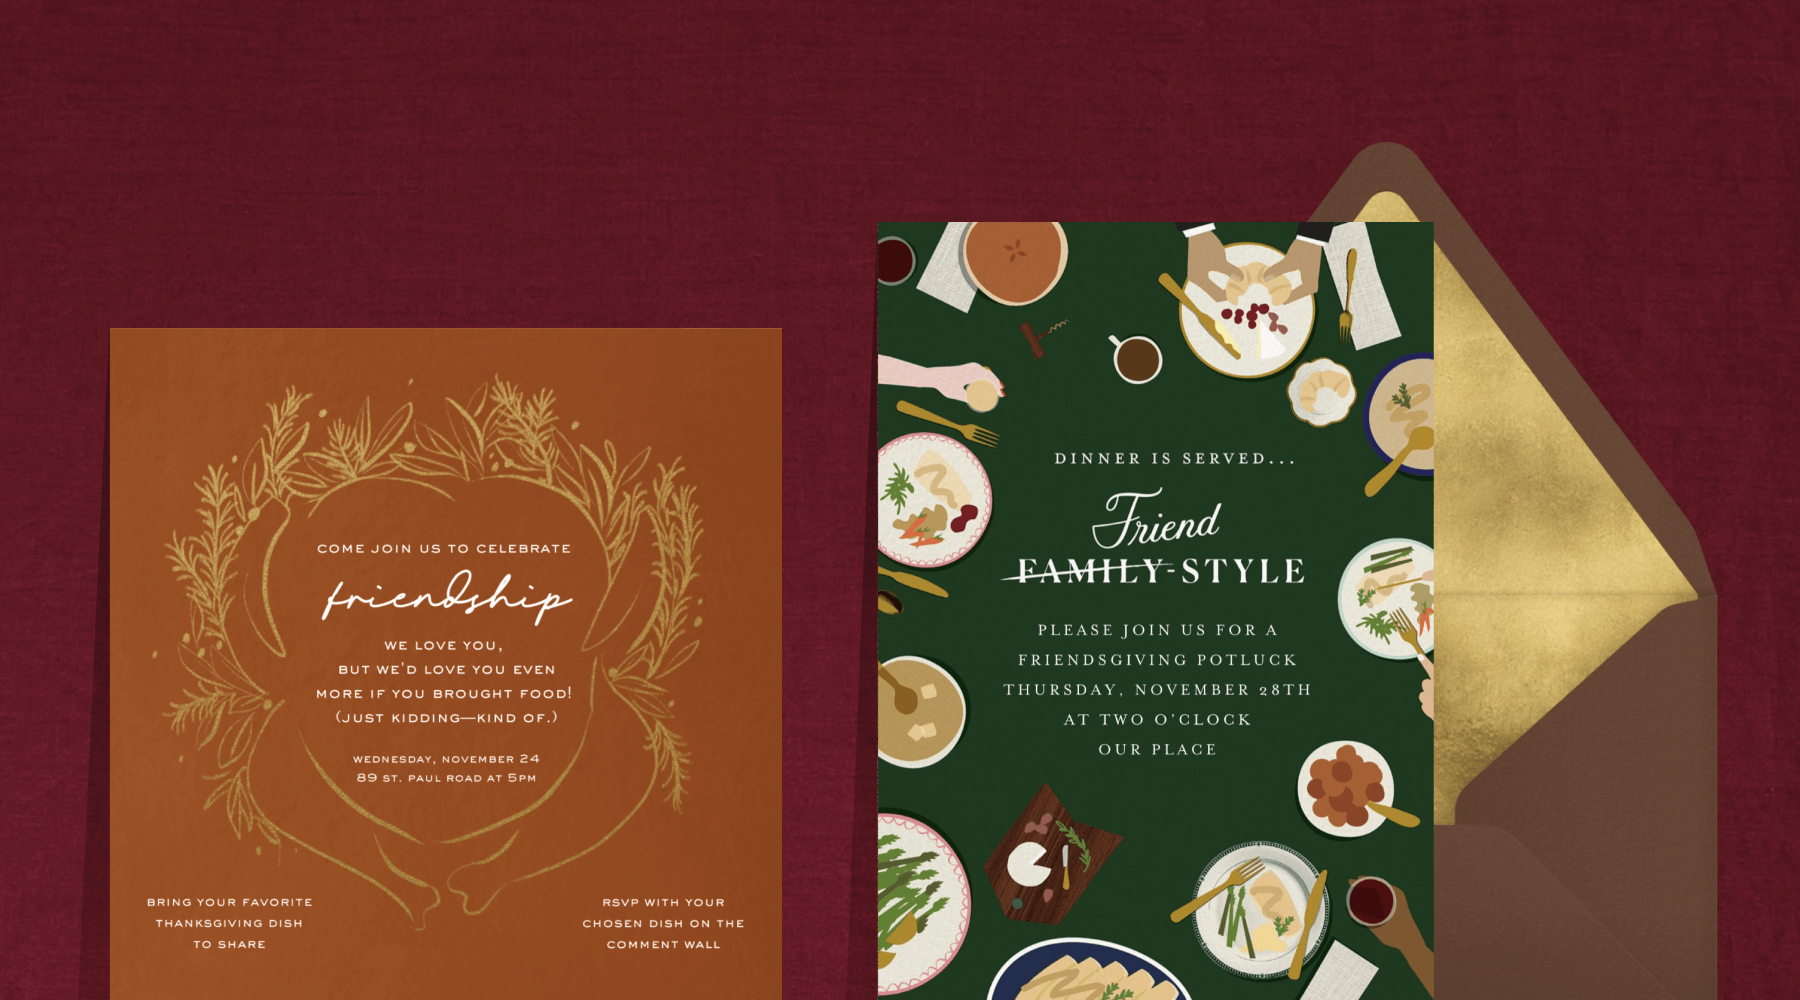 Left: An orange Friendsgiving invitation with a gold outline of a dressed turkey. Right: A green Friendsgiving invitation with a border of hands engaging in a meal with plates, food, and drinks.